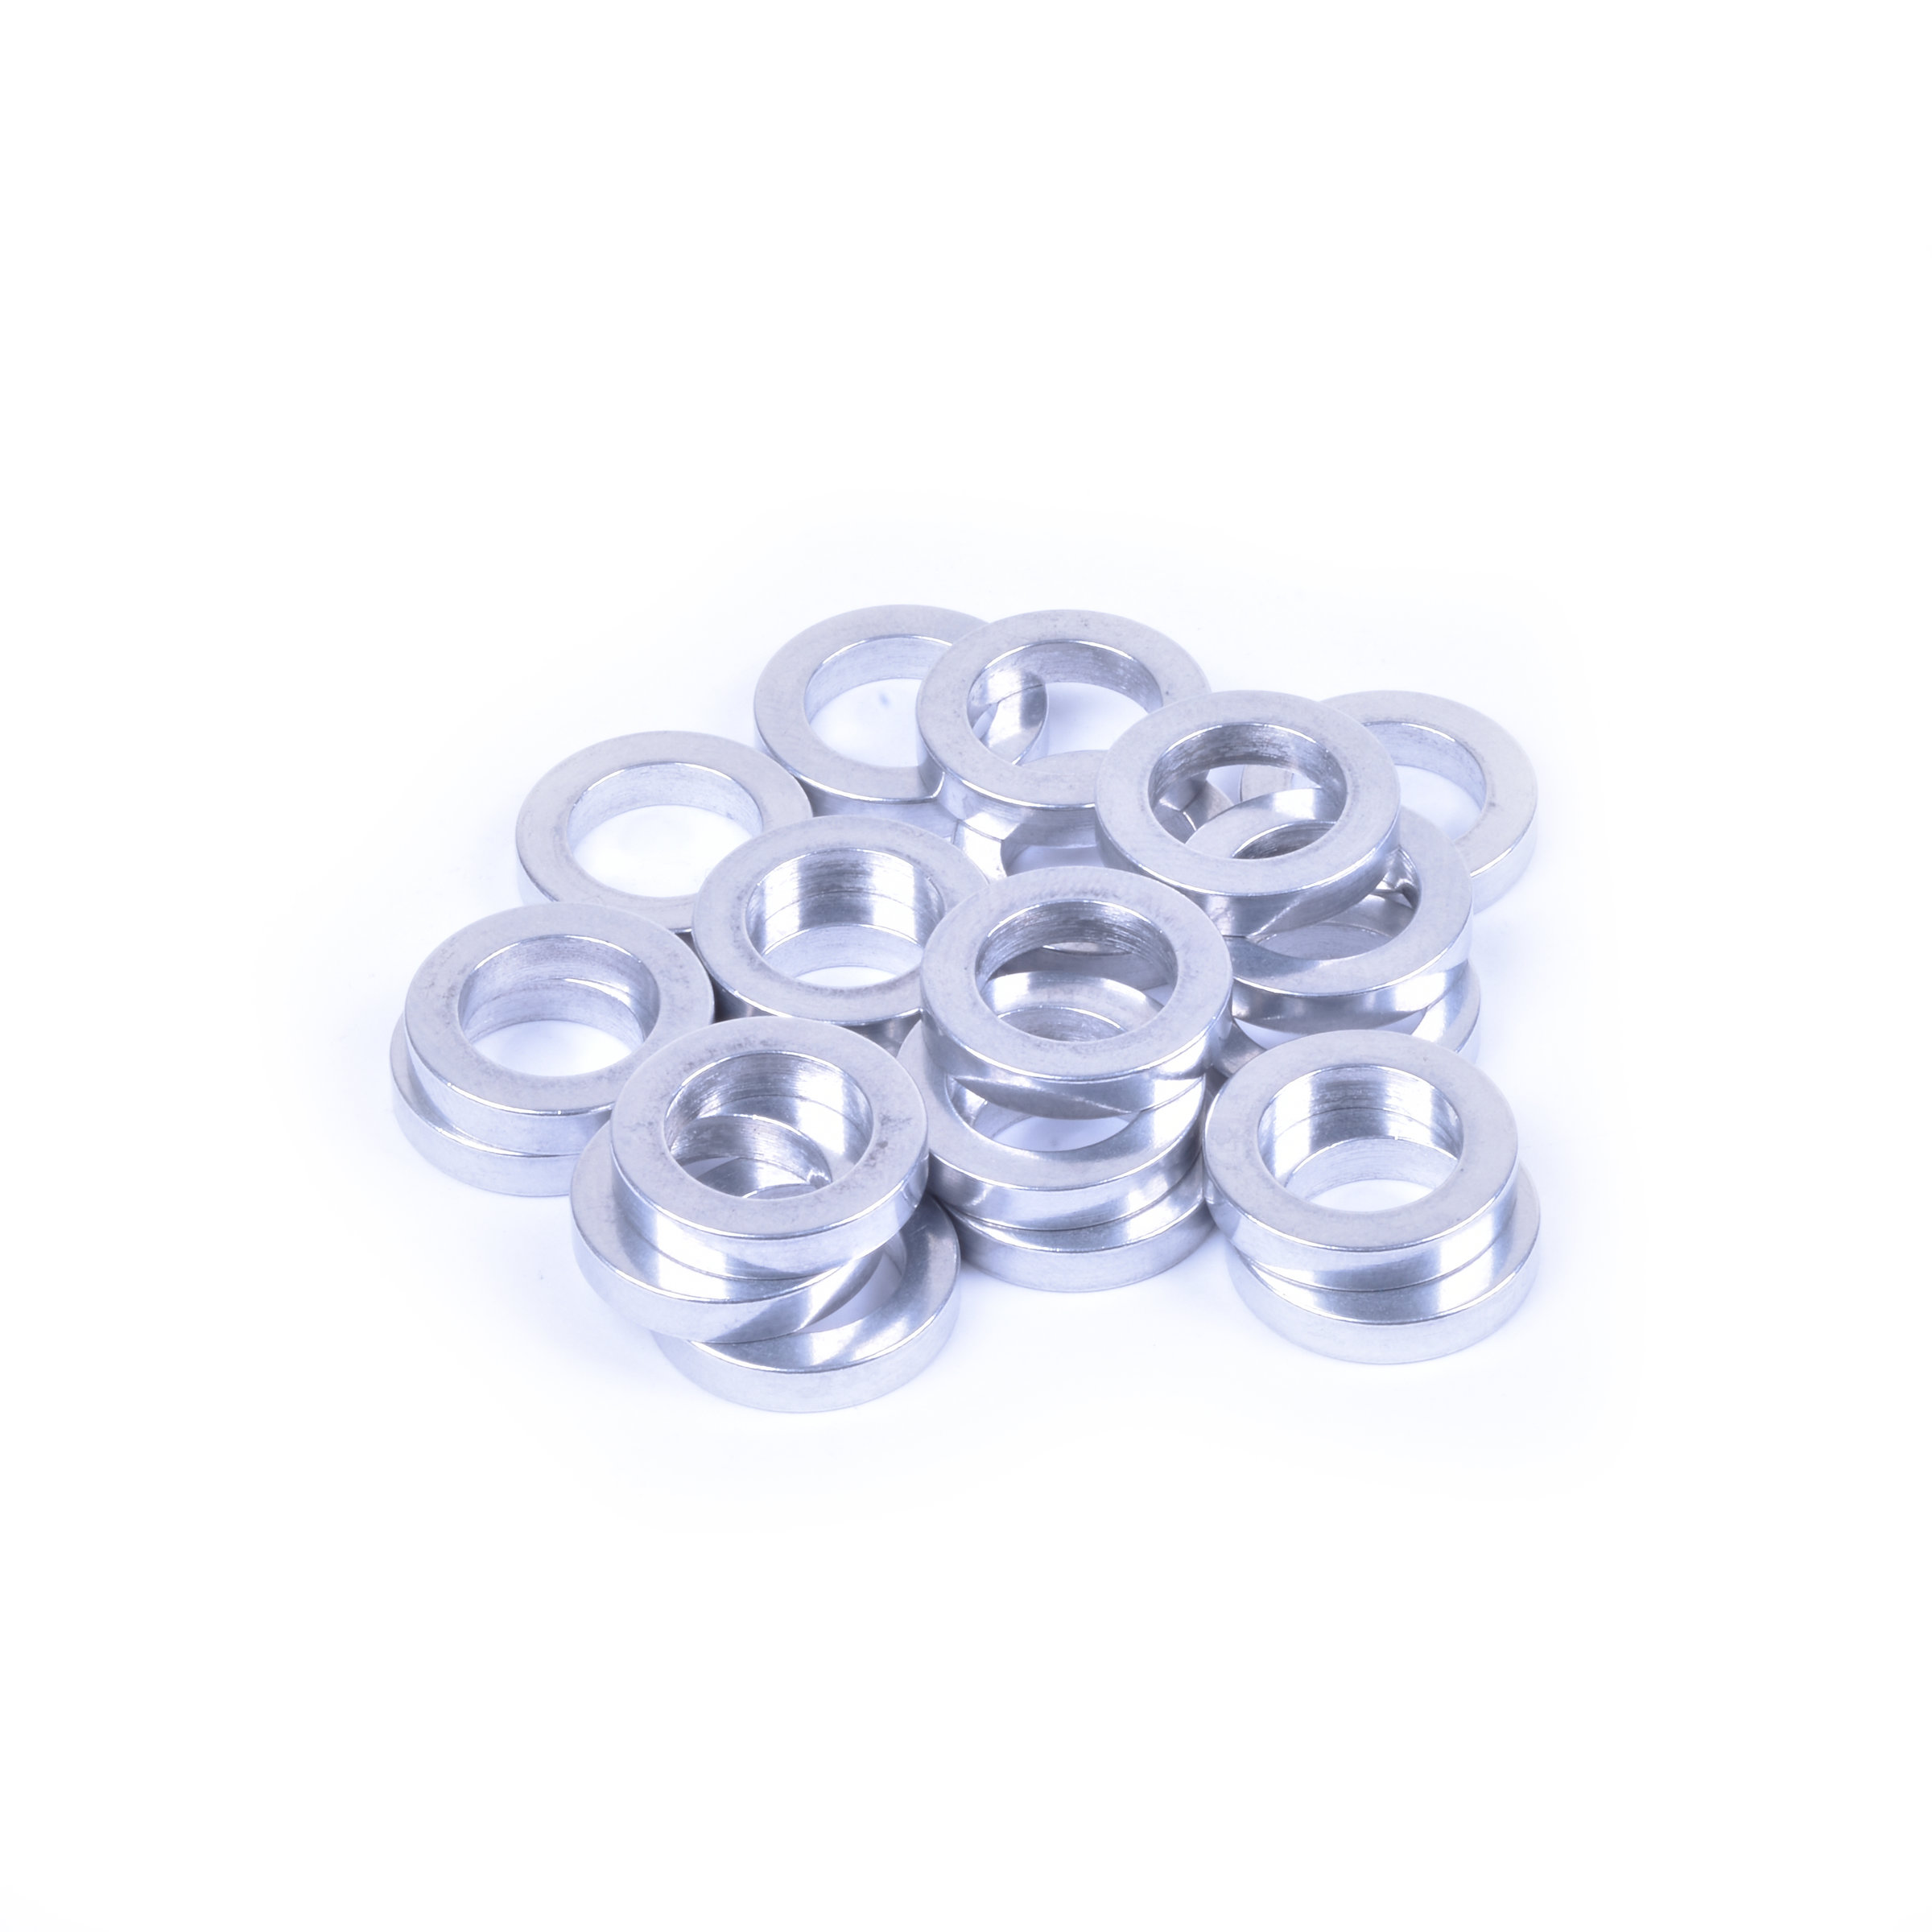 Wheels Manufacturing 3mm rear axle spacers bag of 20 